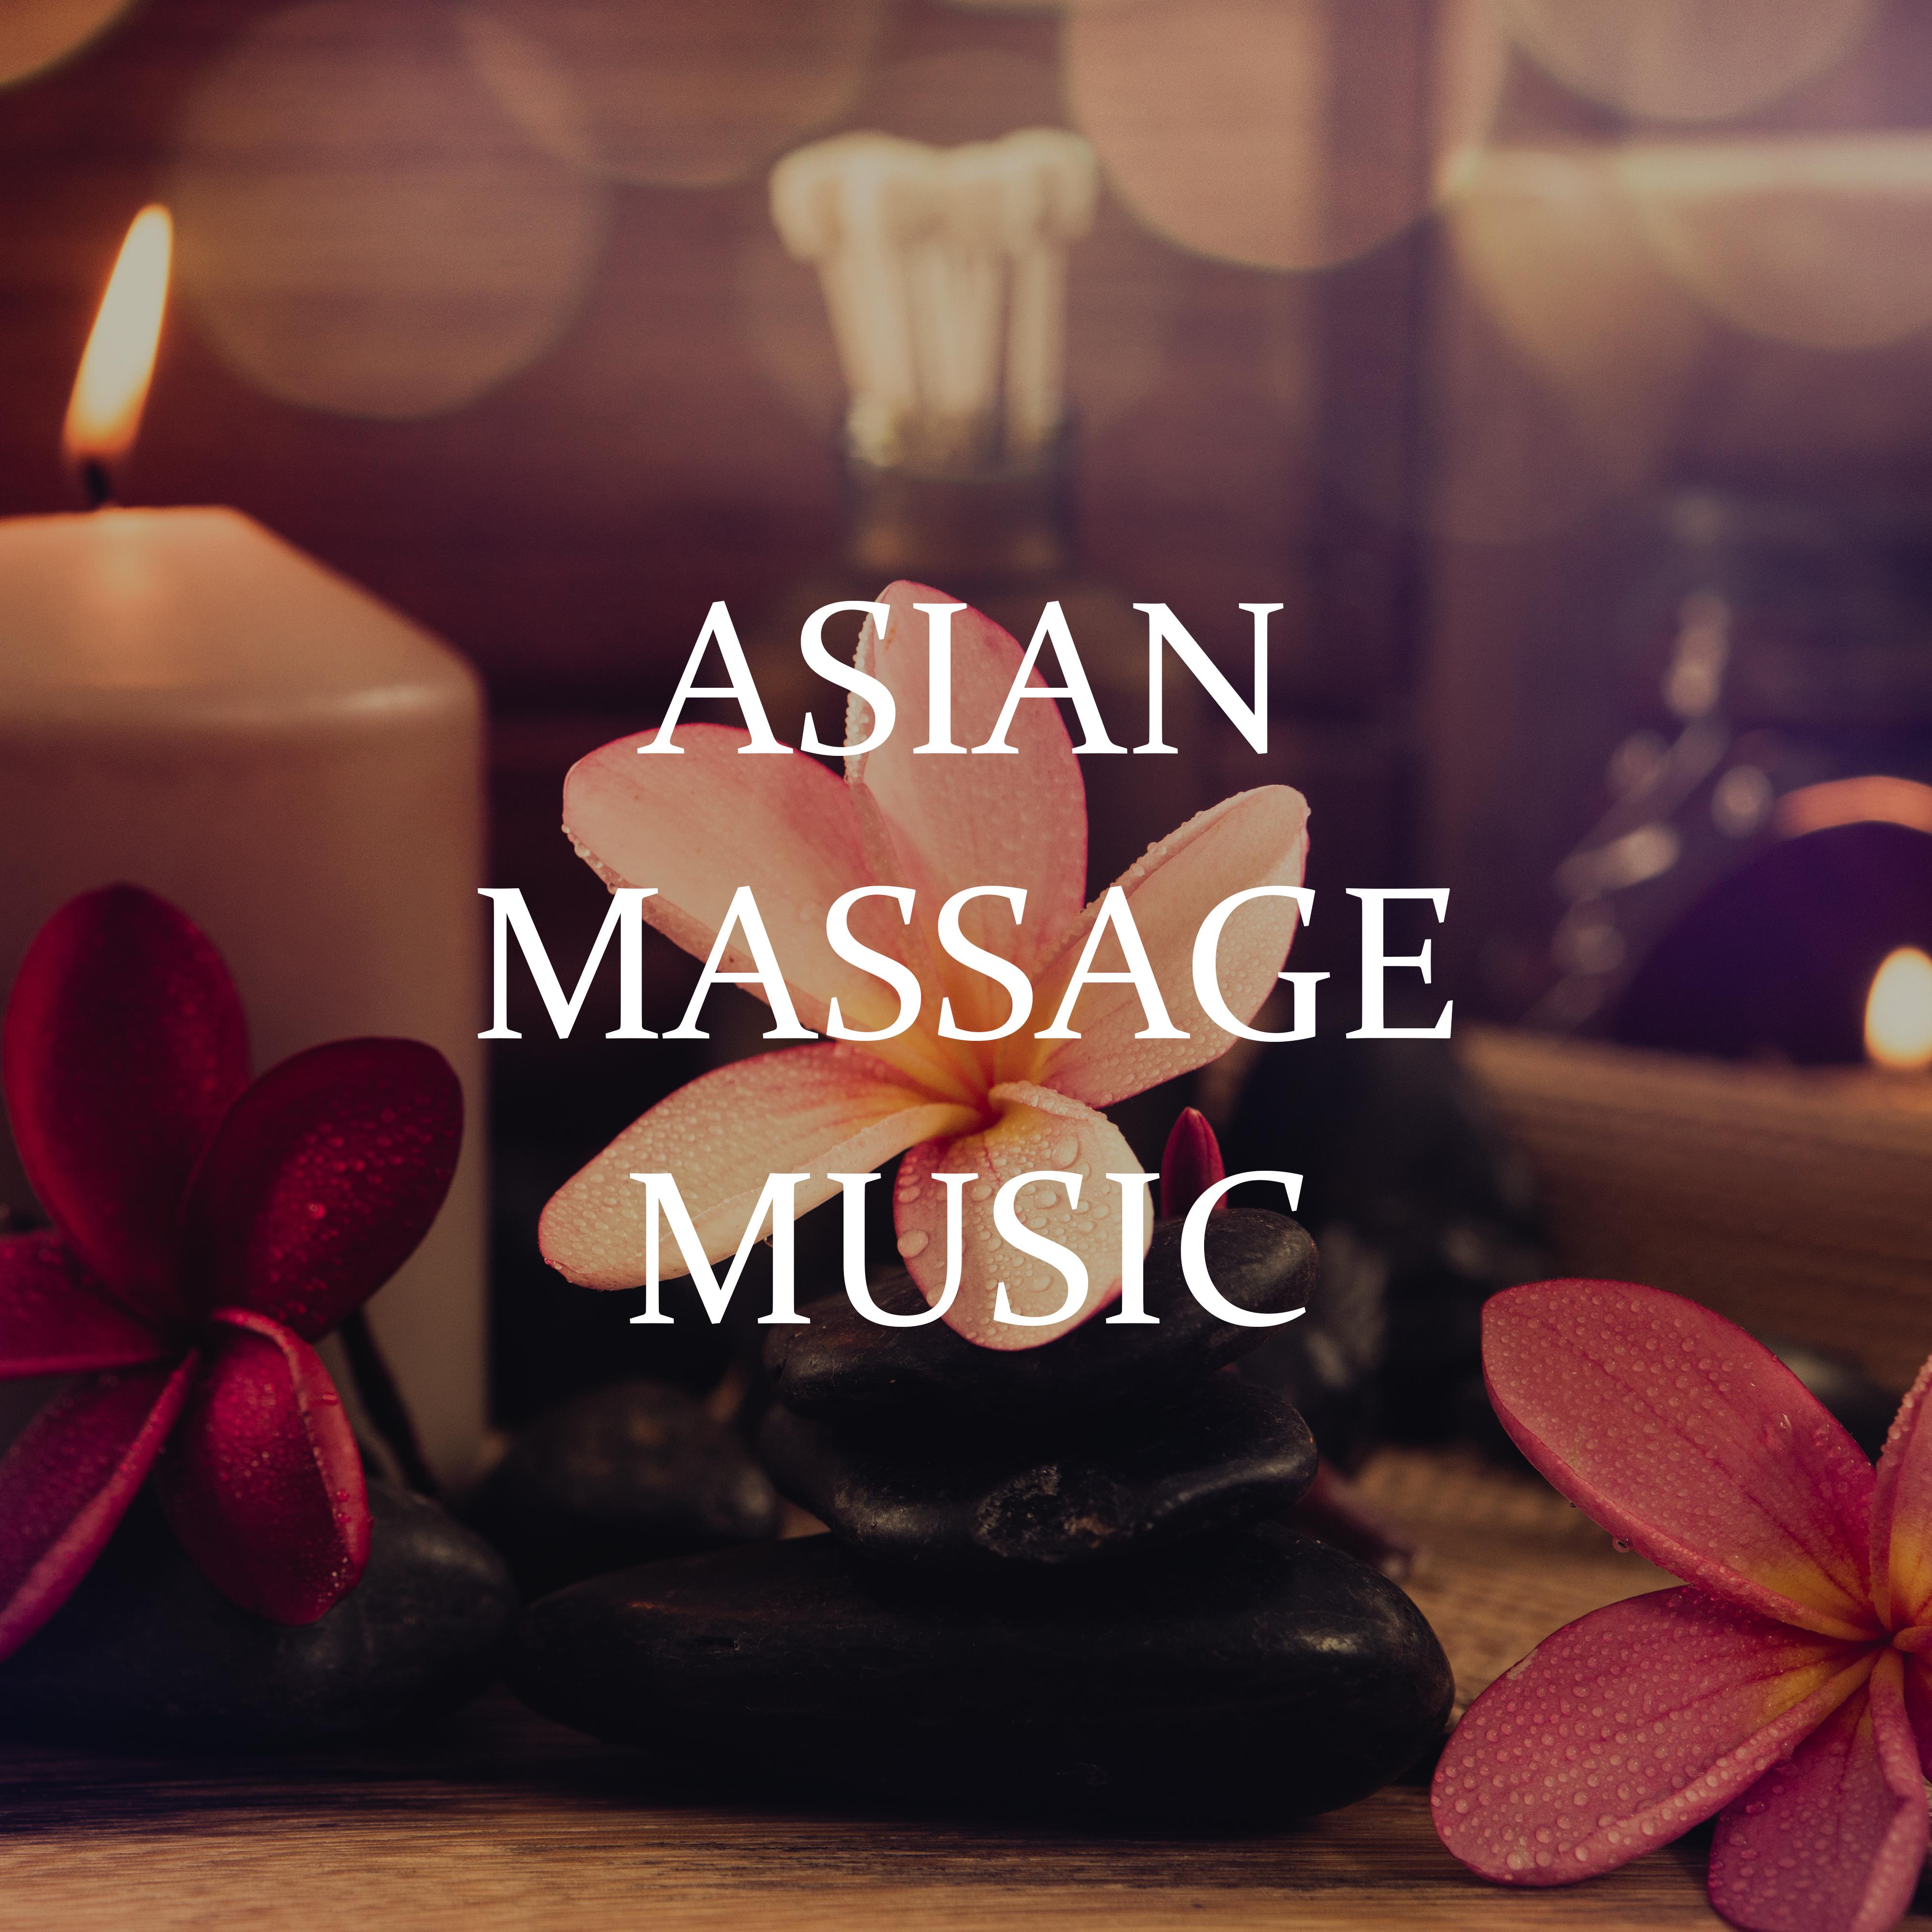 Asian Massage Music: 15 Relaxing Tracks Created for Massage, Relaxation and Rest during the Treatment